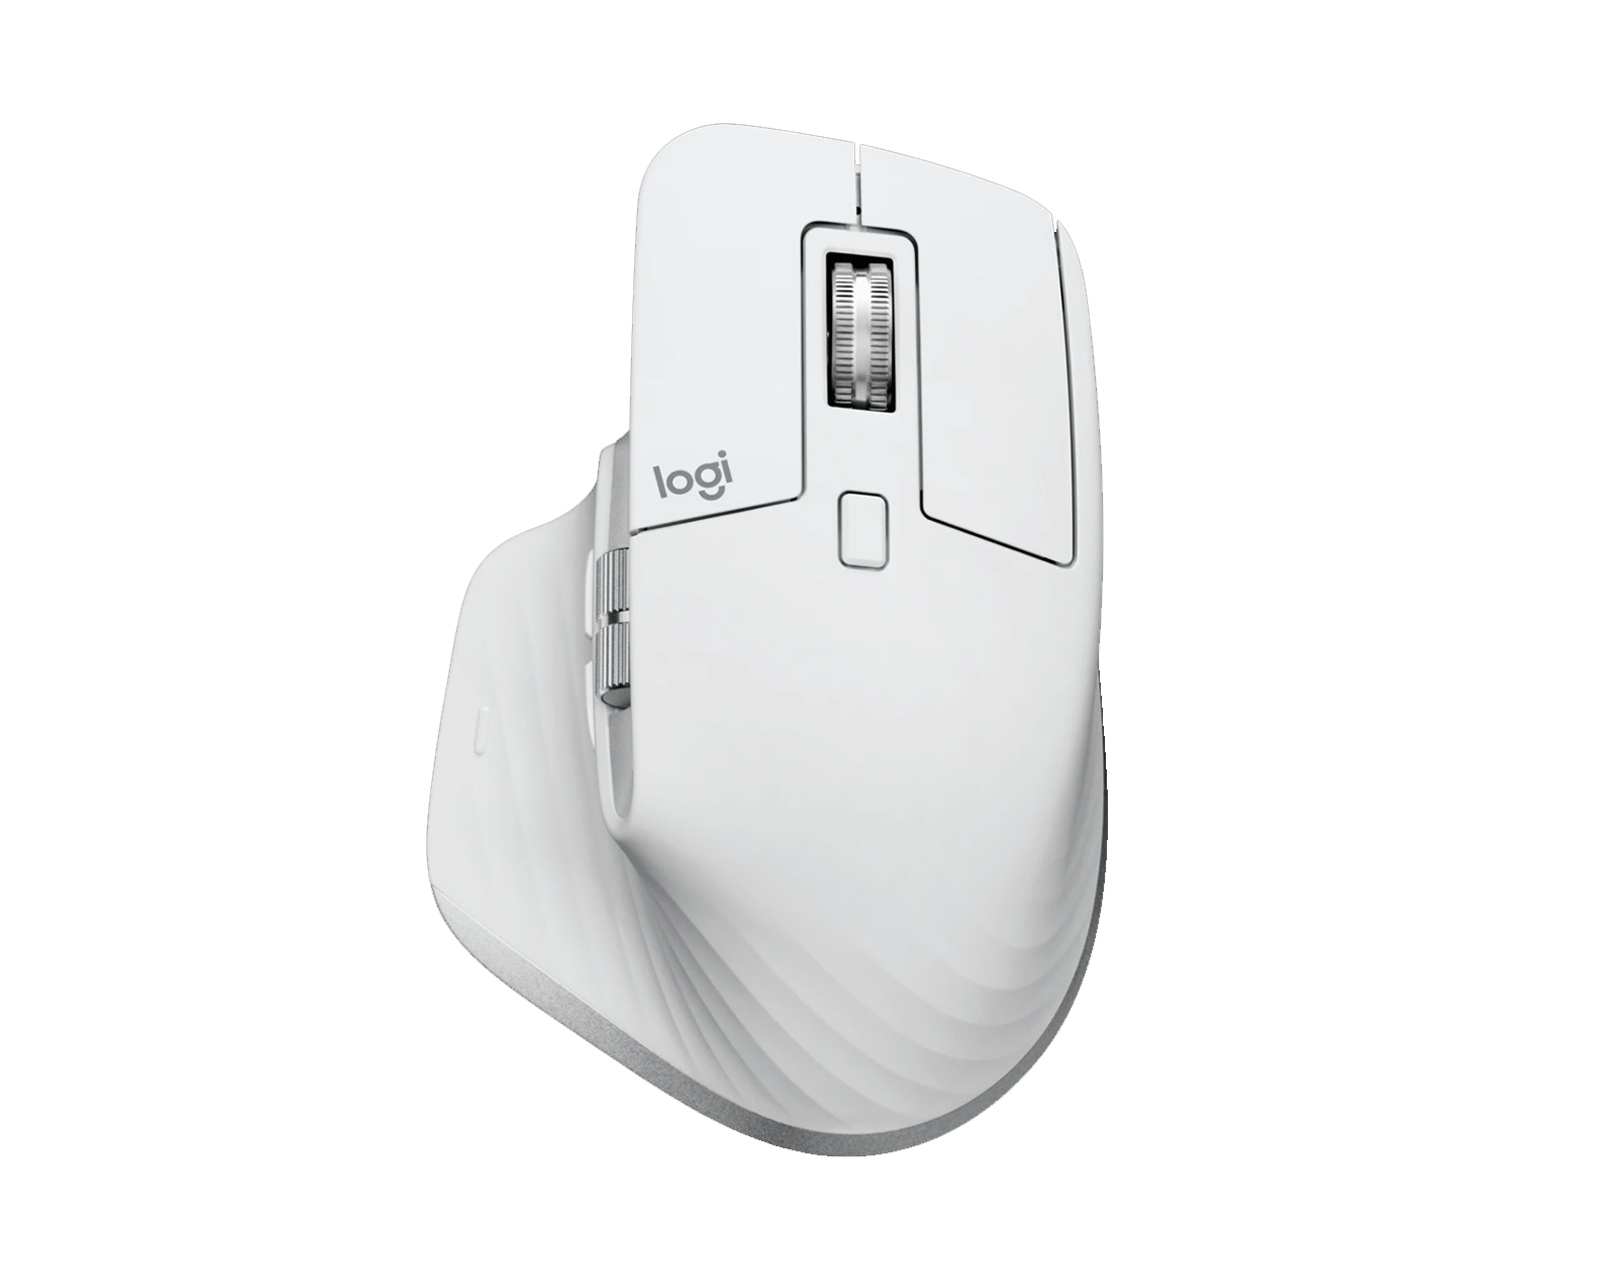 Spoil Method Foresee Logitech MX Master 3S Performance Wireless Mouse - Pale Grey -  us.MaxGaming.com